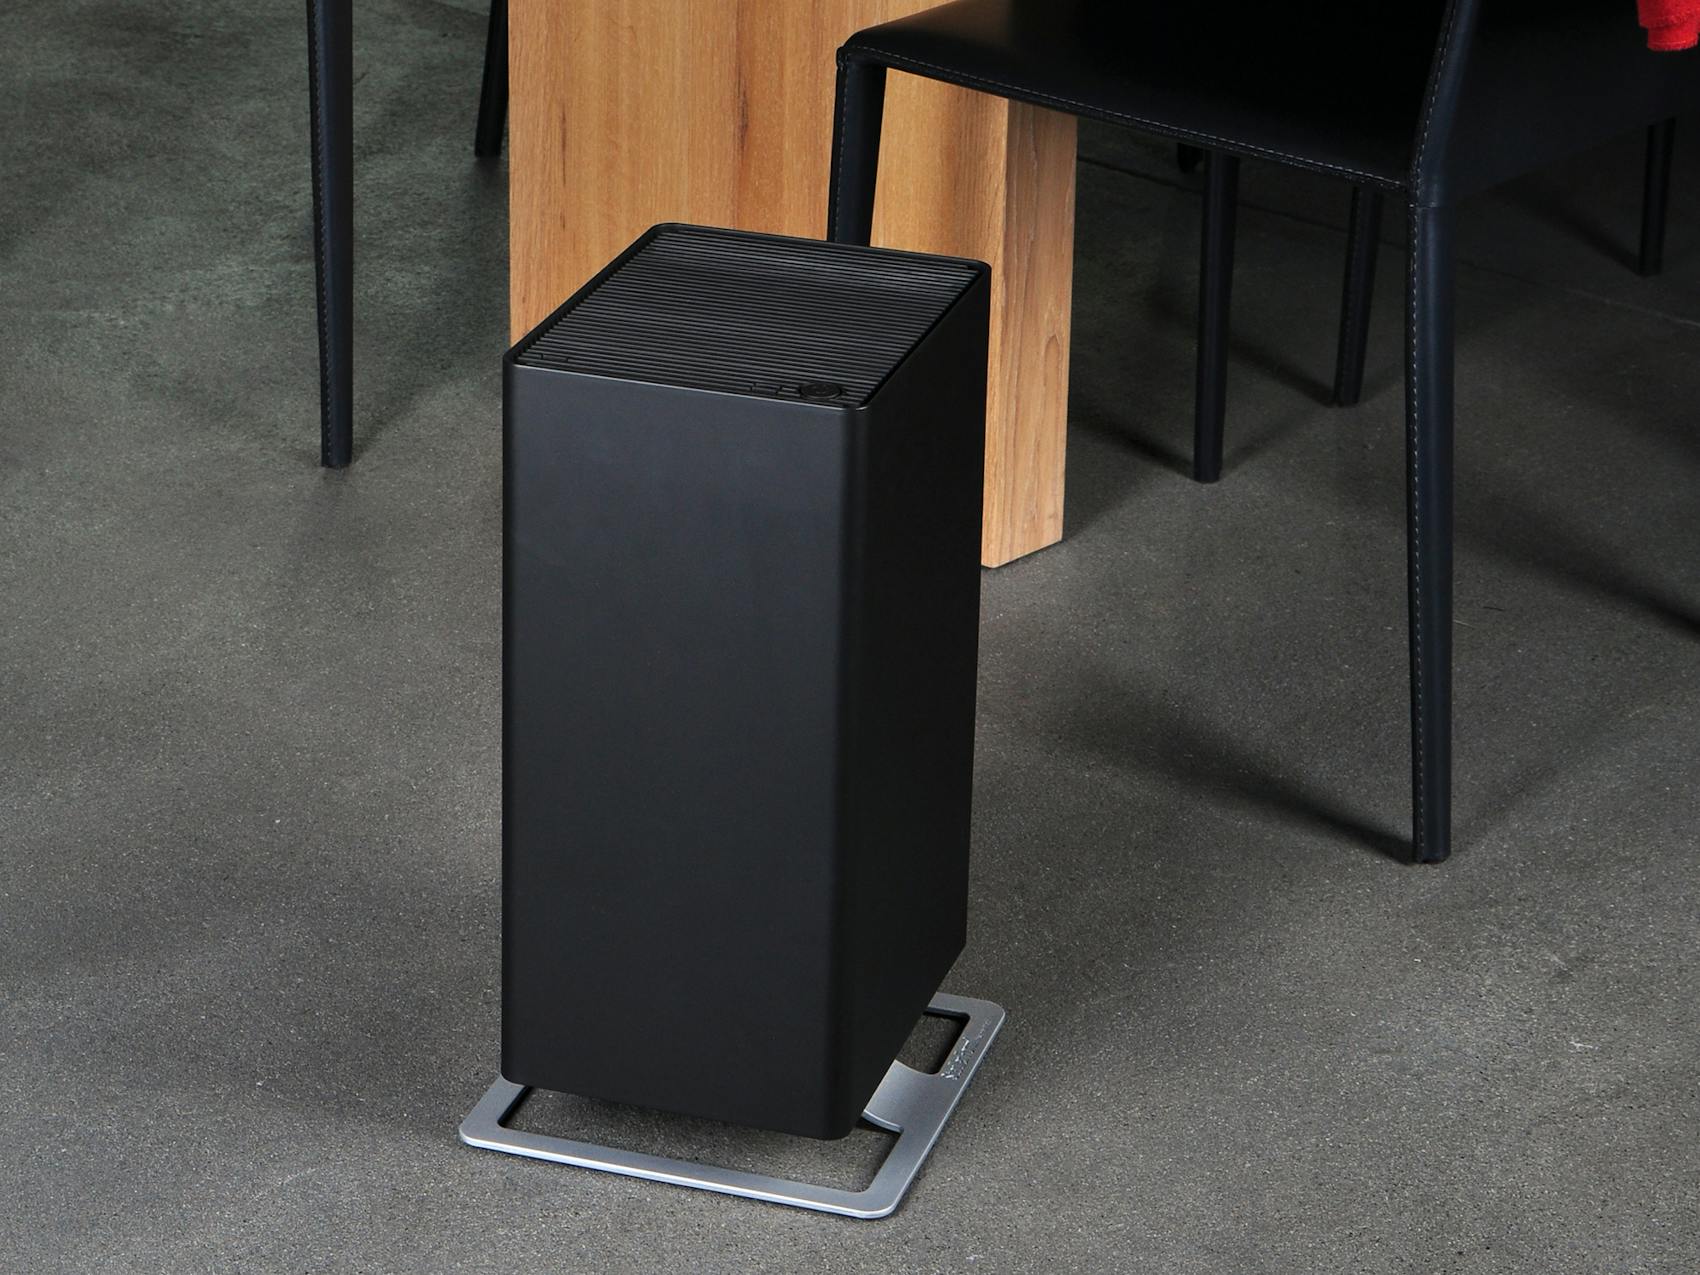 Viktor air purifier by Stadler Form in black next to a dining table